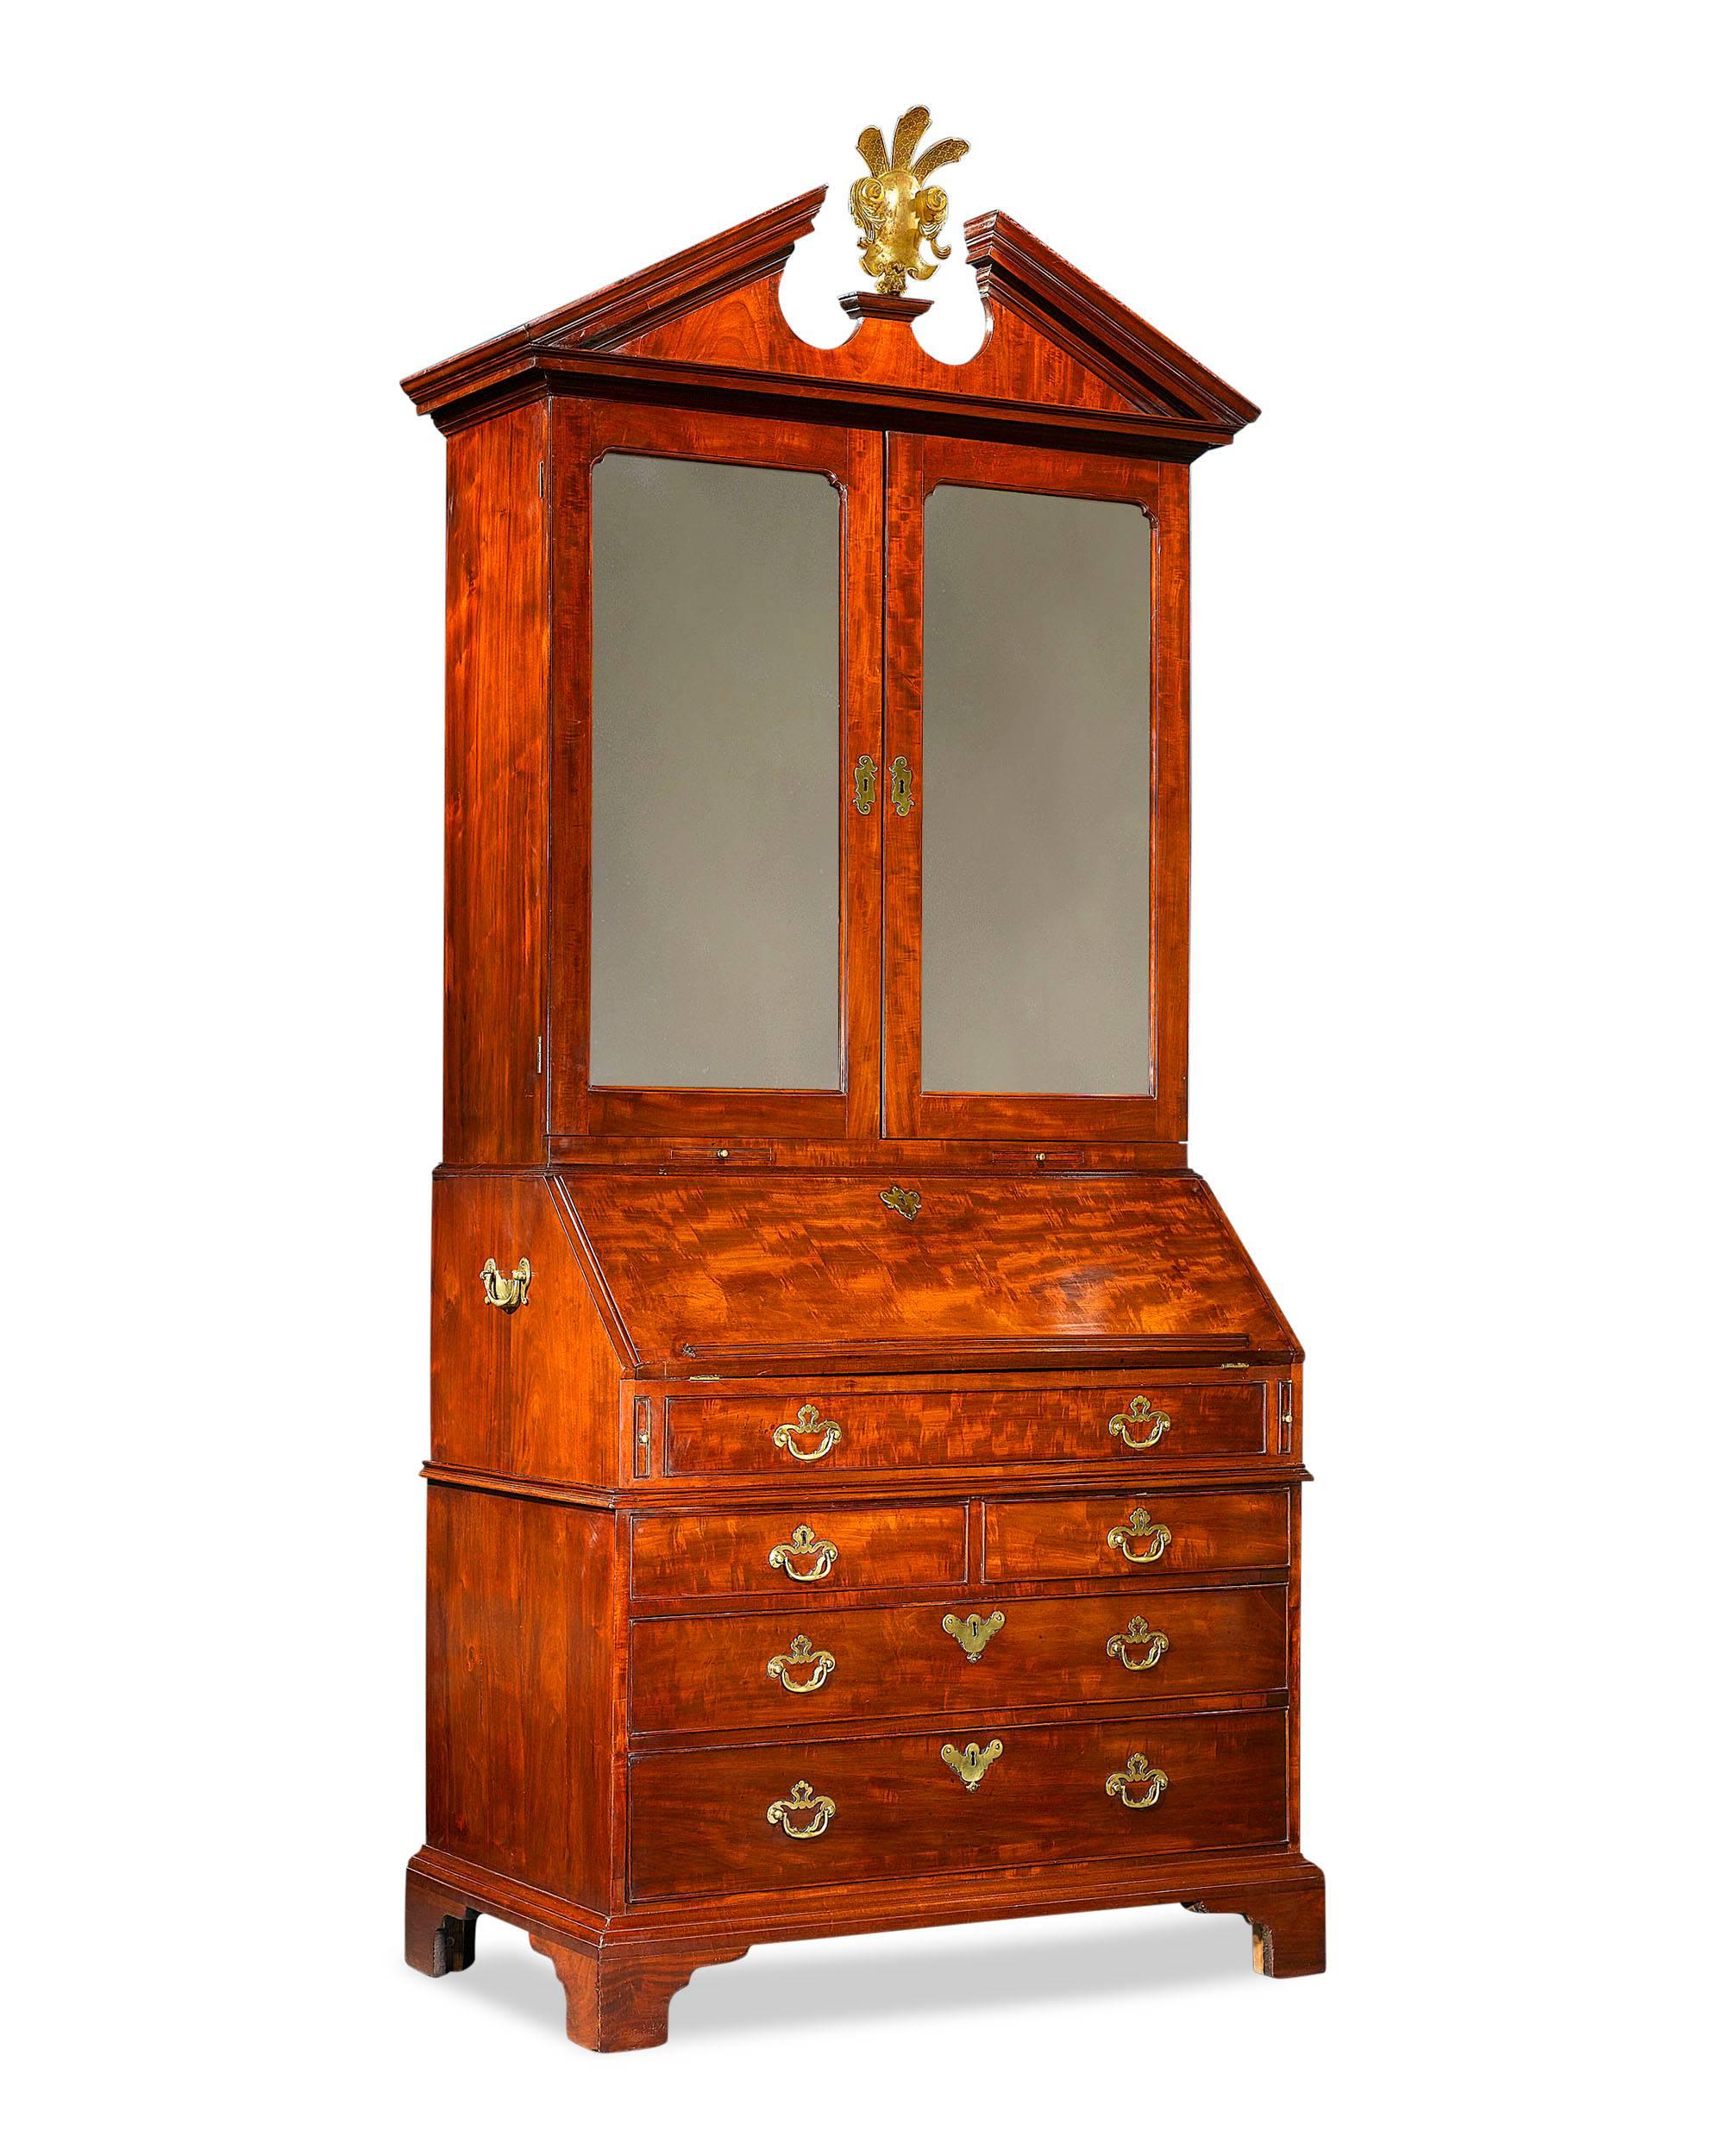 This exceptional Georgian secrétaire-cabinet was crafted in the style of Thomas Chippendale and displays both the scale and perfect proportions for which Chippendale furniture is renowned. Crafted of luxurious mahogany, the secrétaire is as